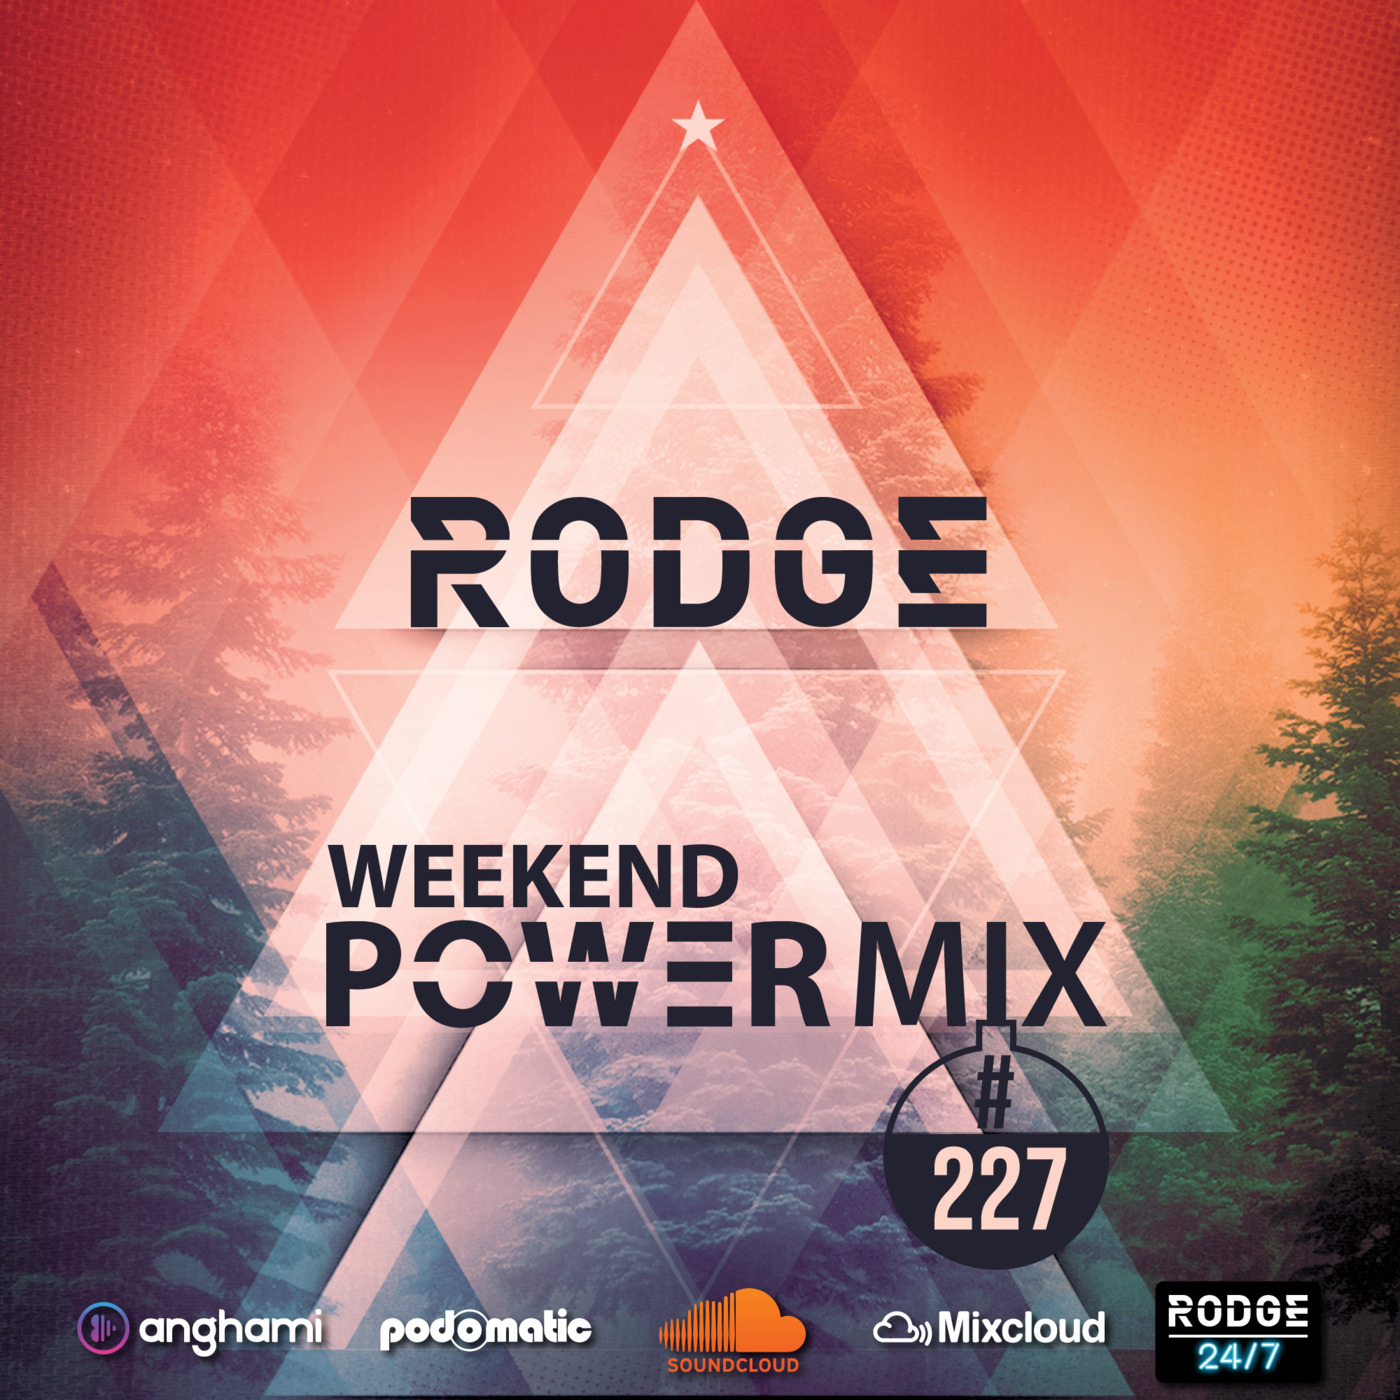 Episode 227: Rodge - WPM (Weekend Power Mix) # 227